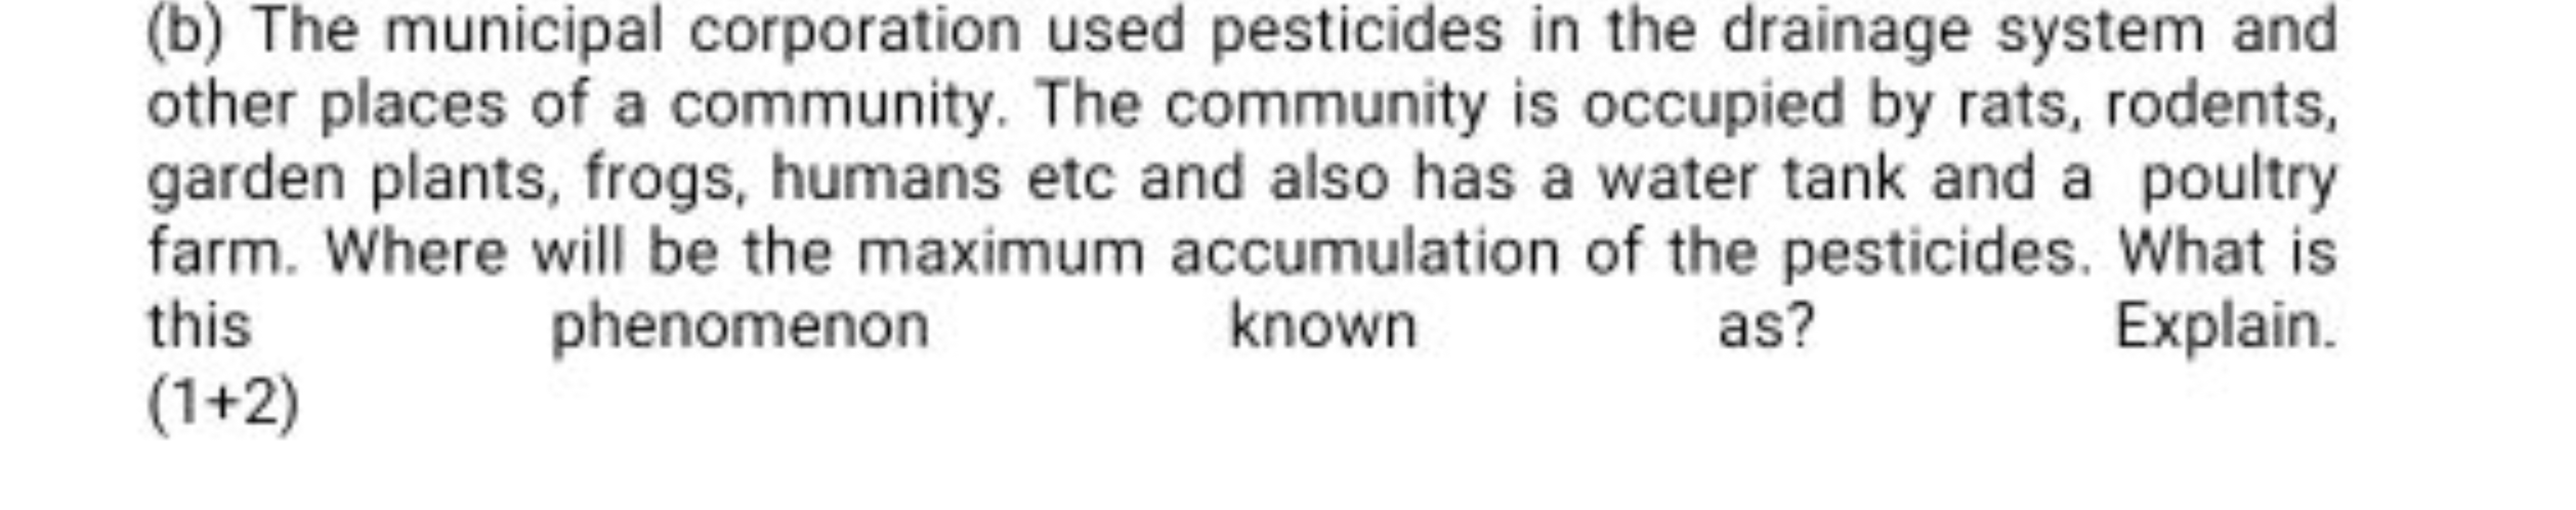 (b) The municipal corporation used pesticides in the drainage system a